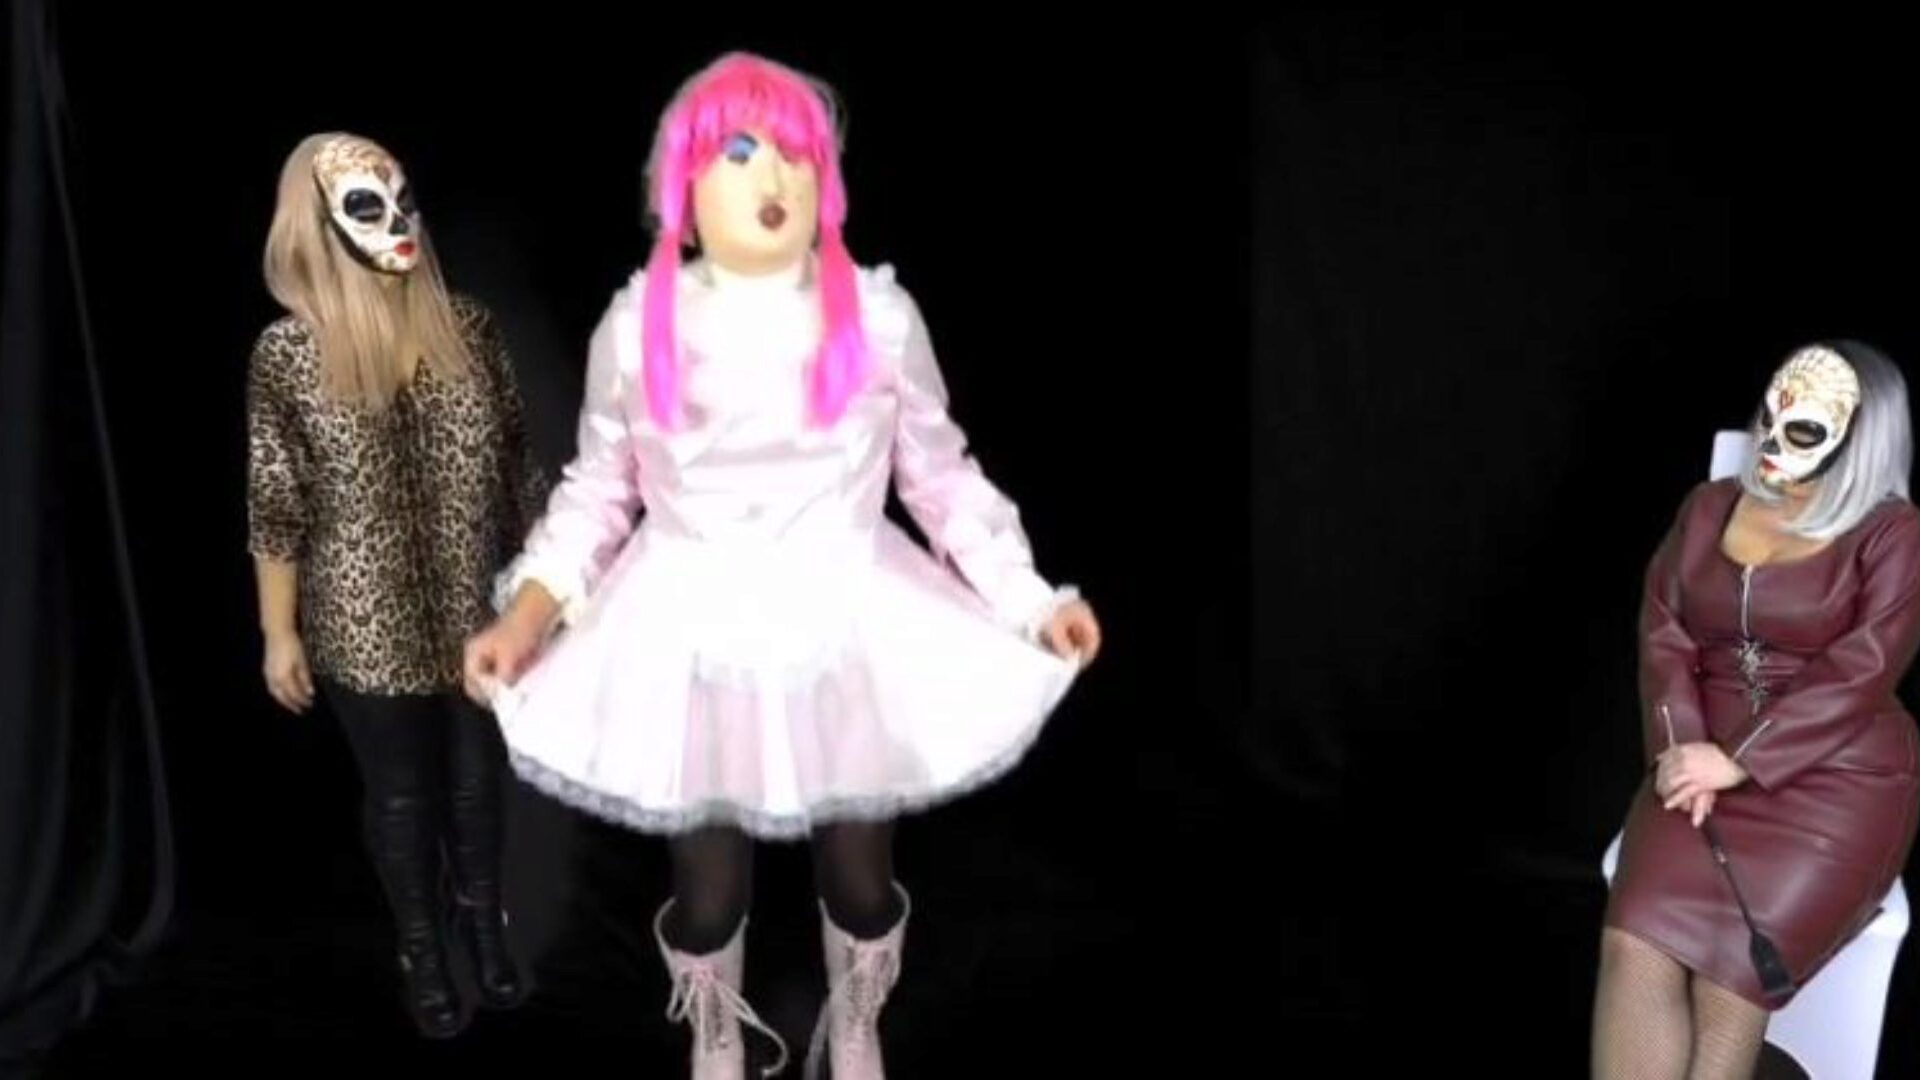 Mistress Terie Breaks In Her Pretty Femdom Sissy Maid Mistress Terie Feminizes her Femdom Bisex Sissy Maid in a marvelous rosy maid out and then cracks him in with her ding-dong including a lovely grease discharged and some beautiful rosy sissy footwear .